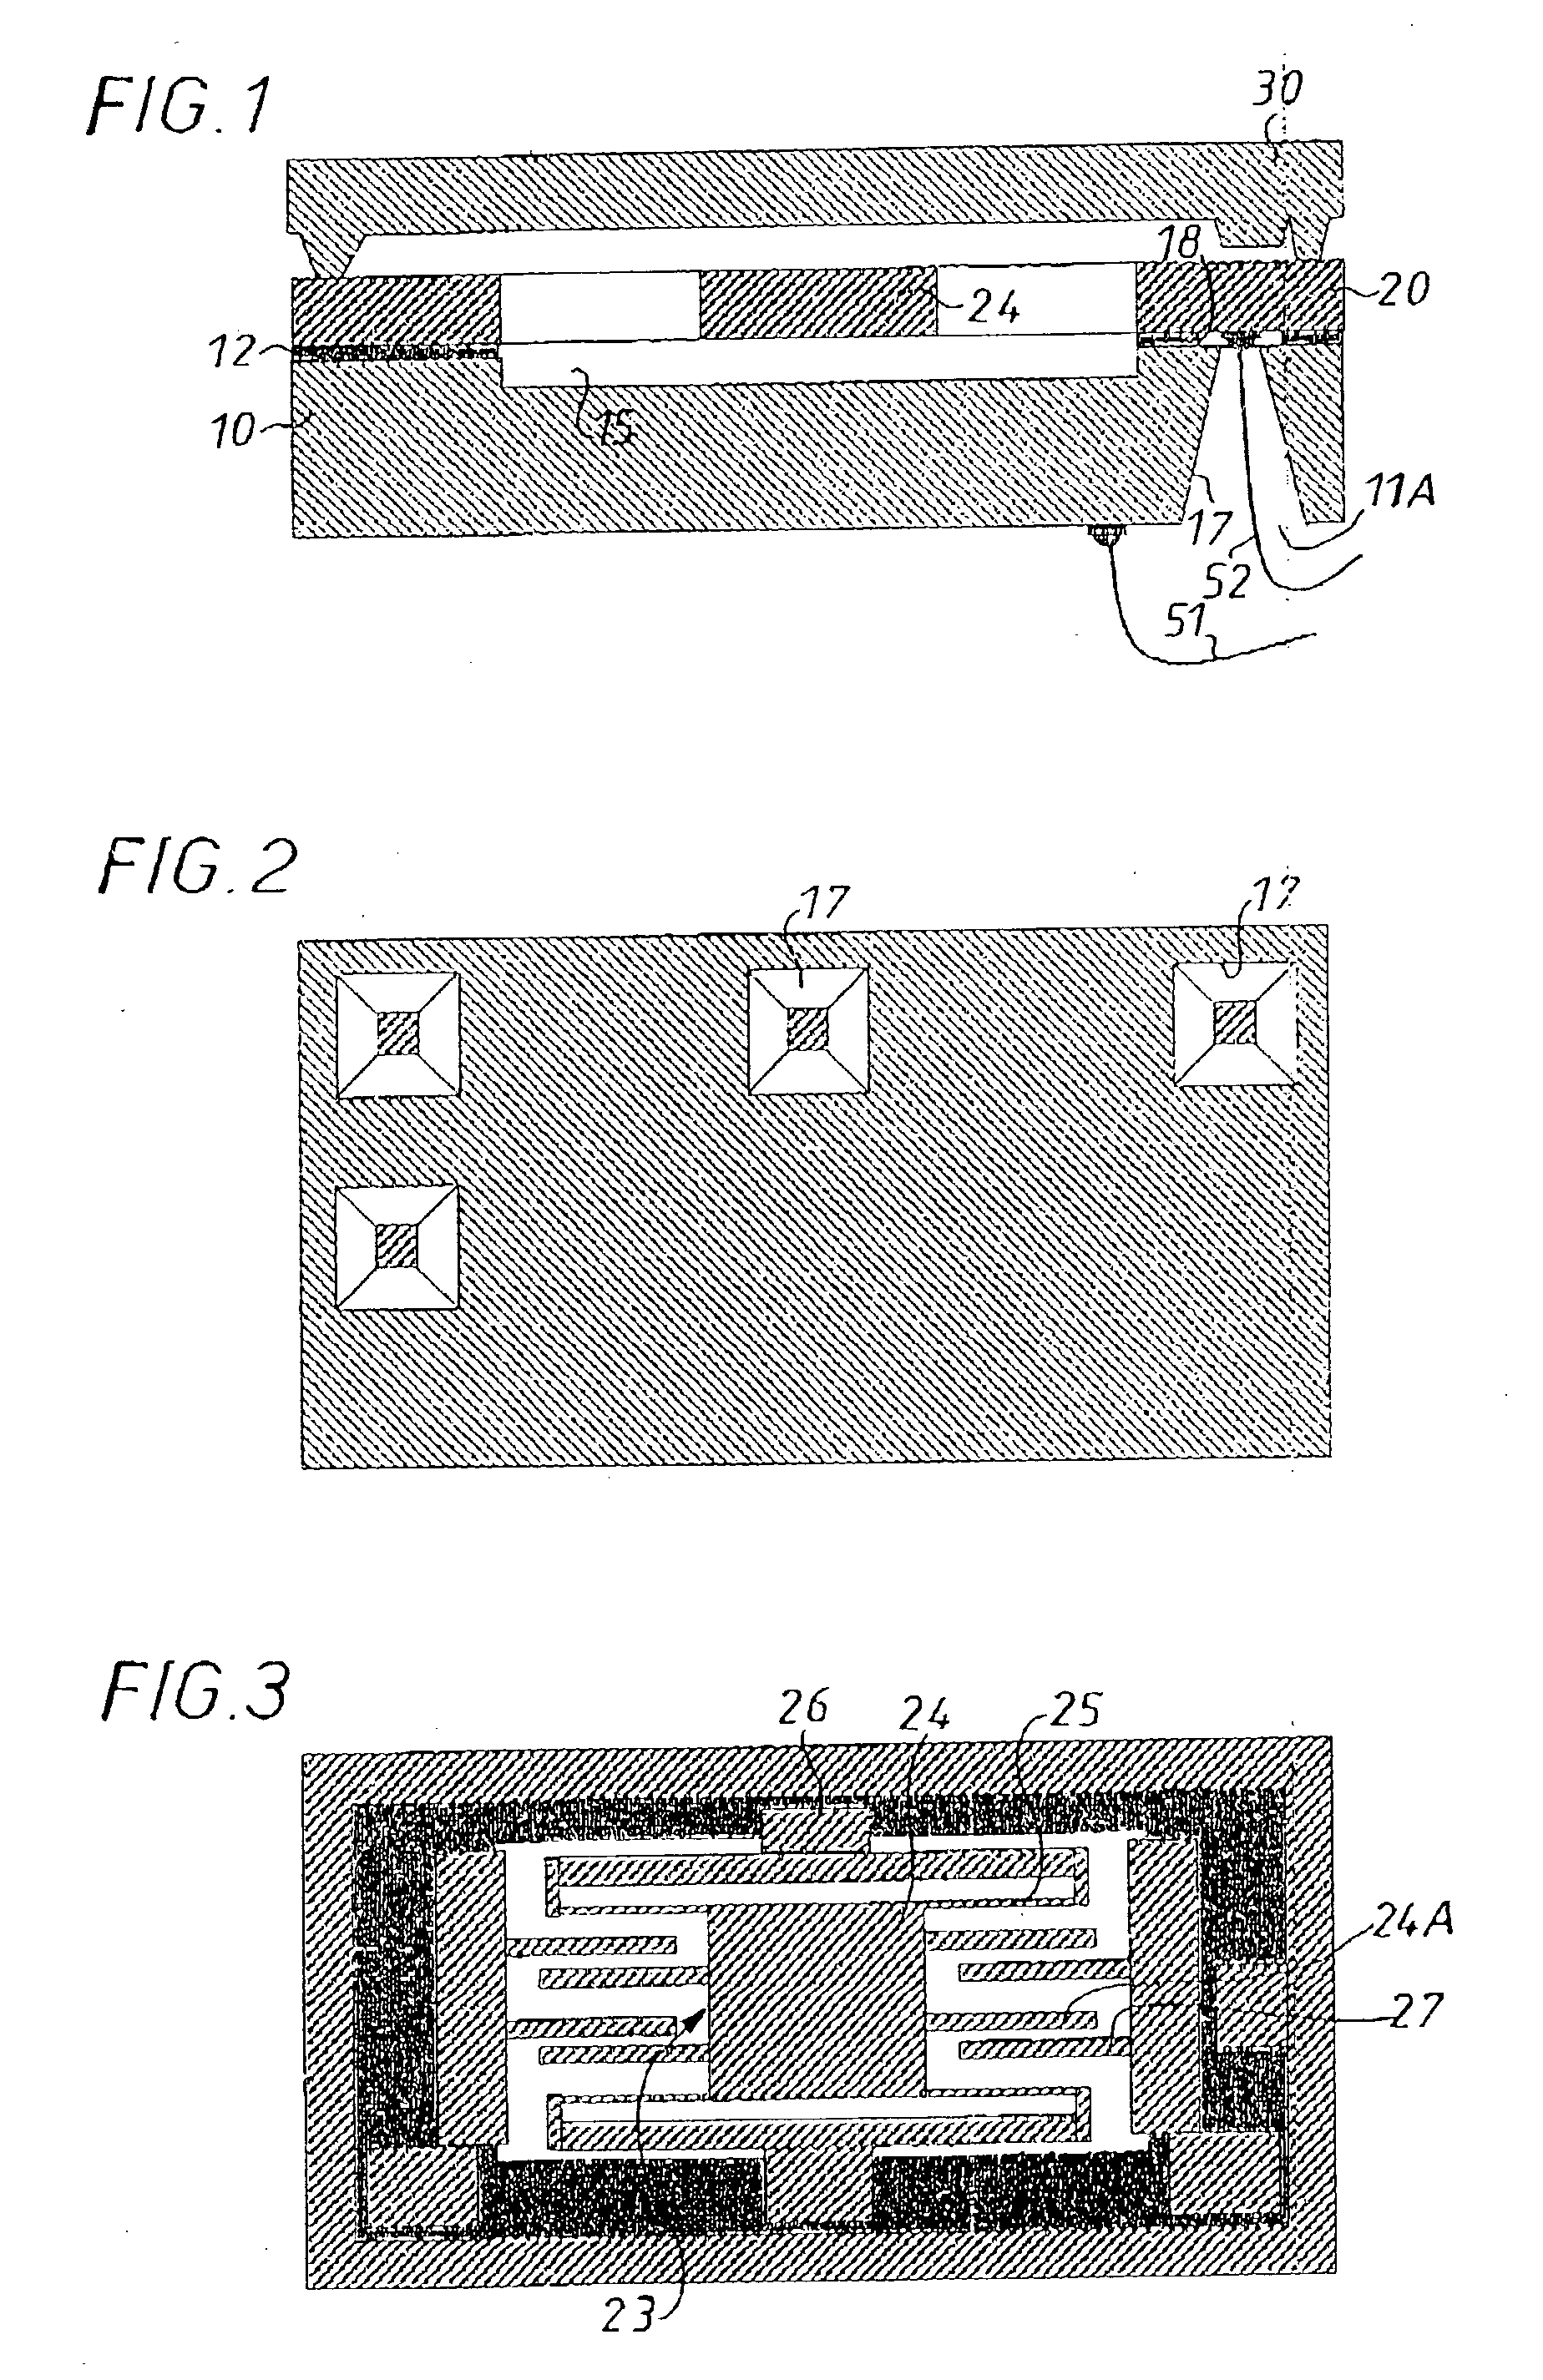 Method of reinforcing a mechanical microstructure